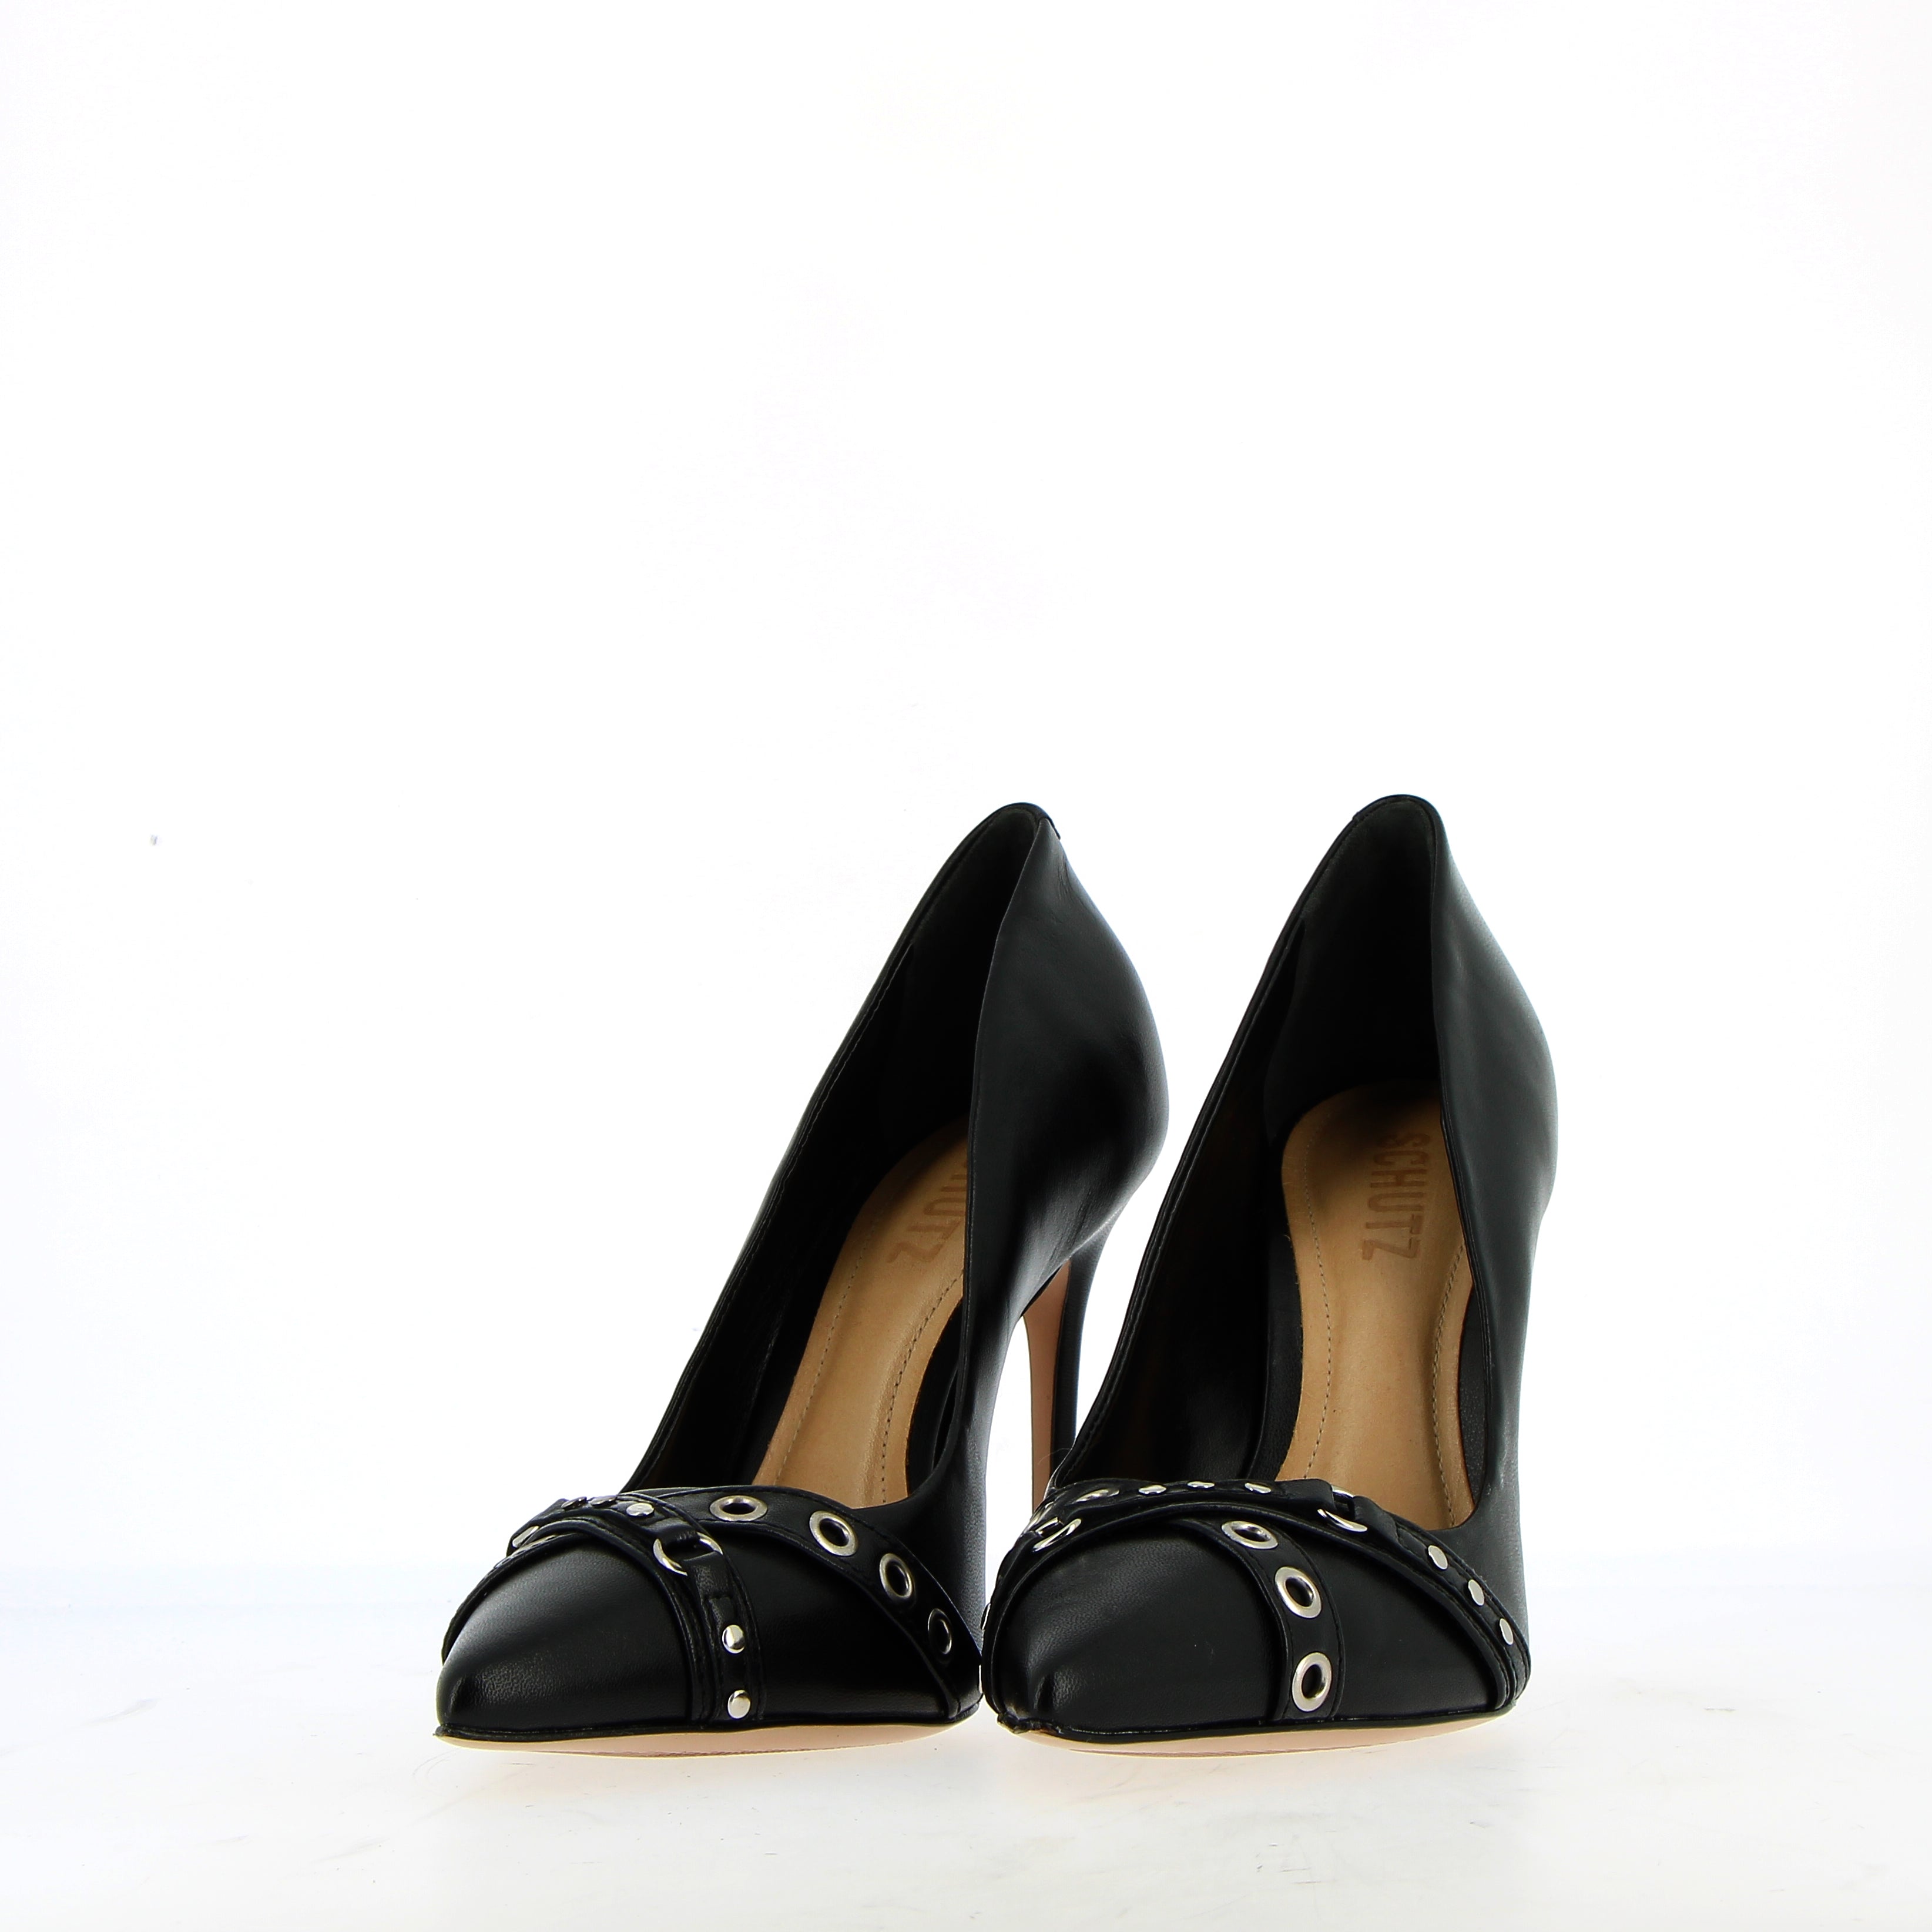 Black leather stiletto pump with studs